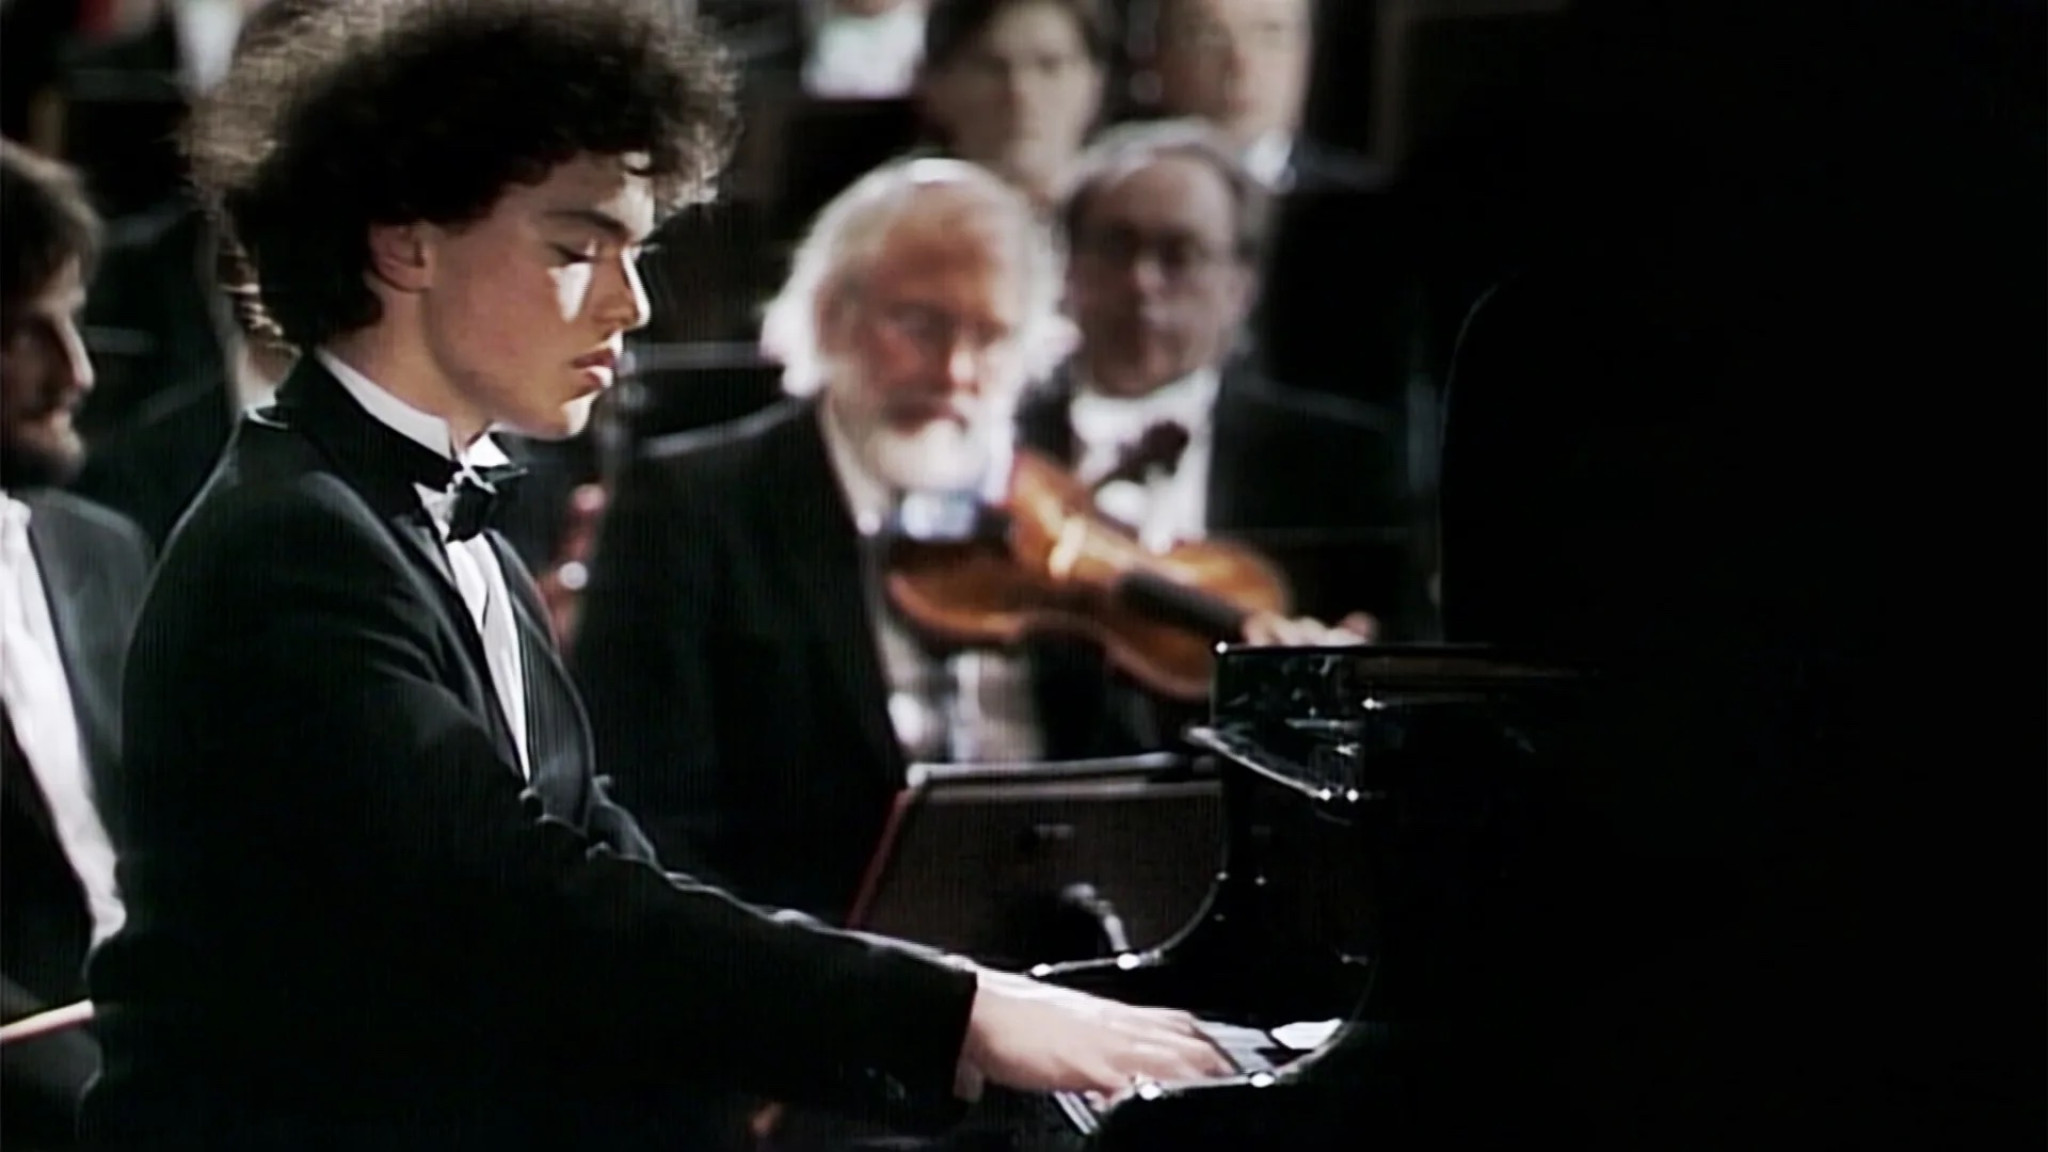 Karajan conducts the New Year's Eve Concert 1988 – with Evgeny Kissin